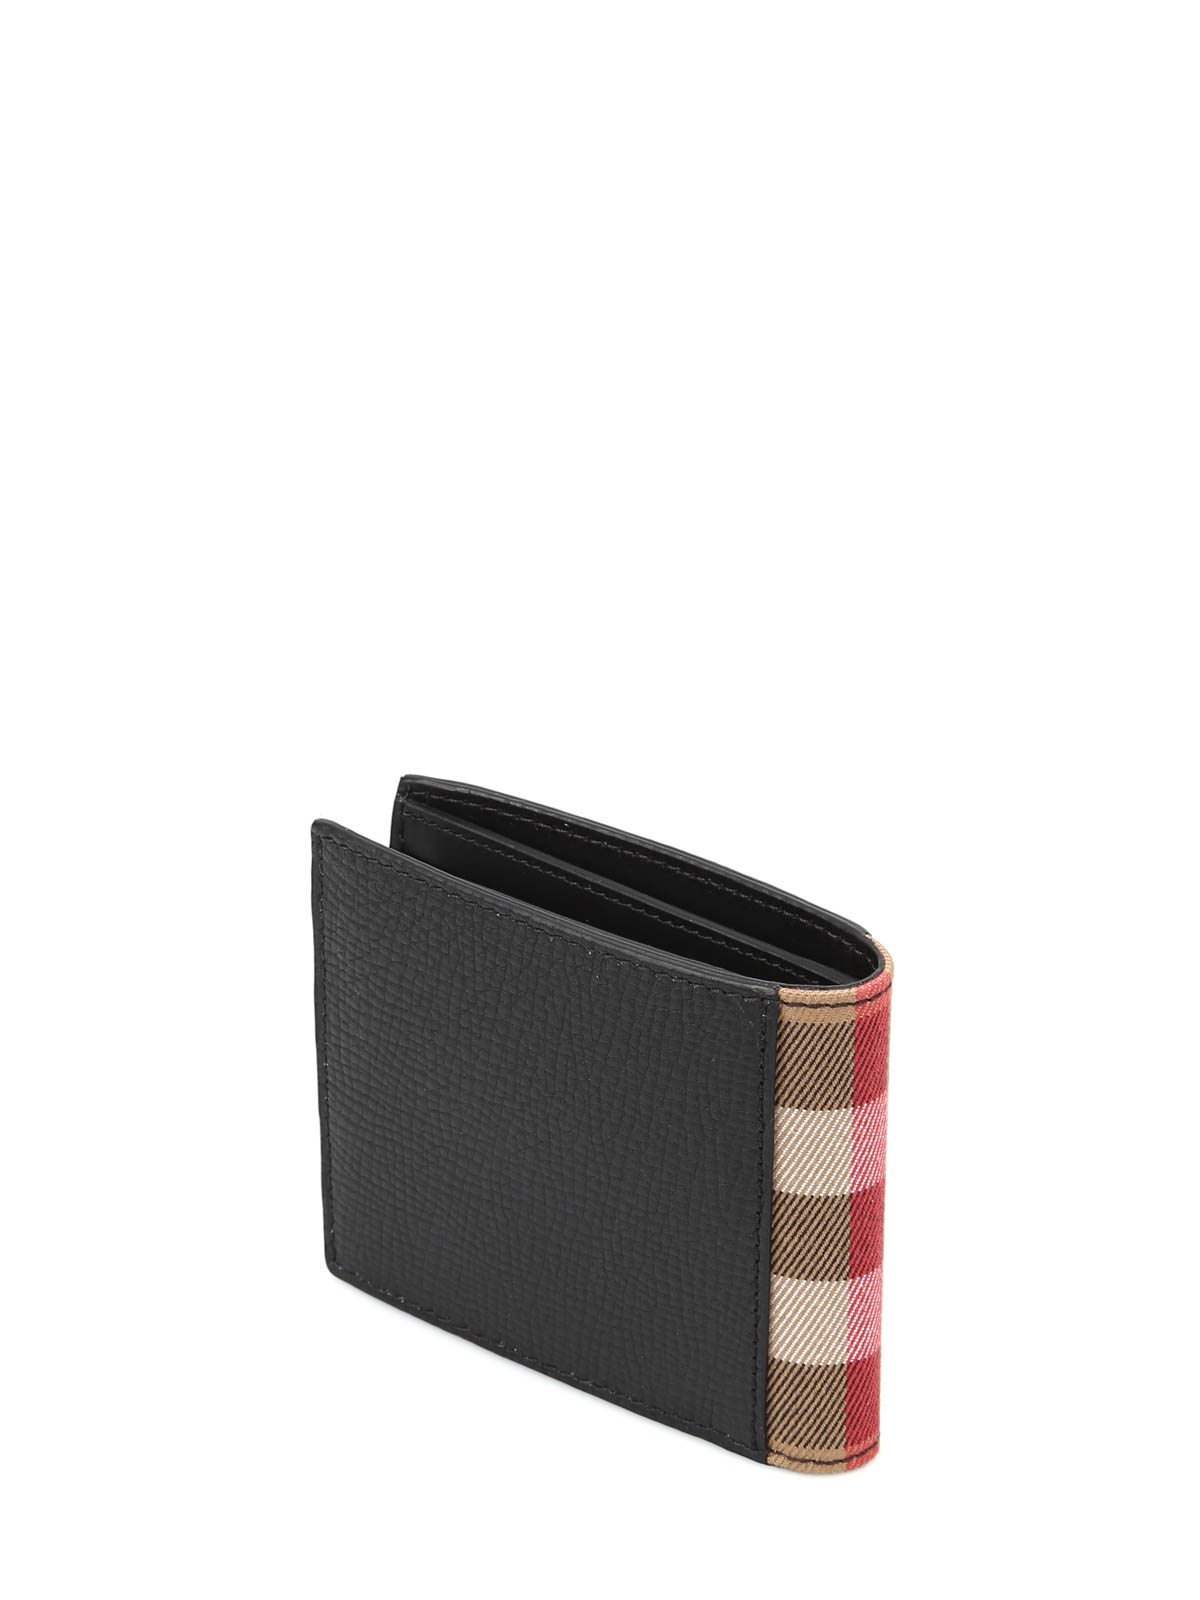 Burberry Fold Over Leather Wallet